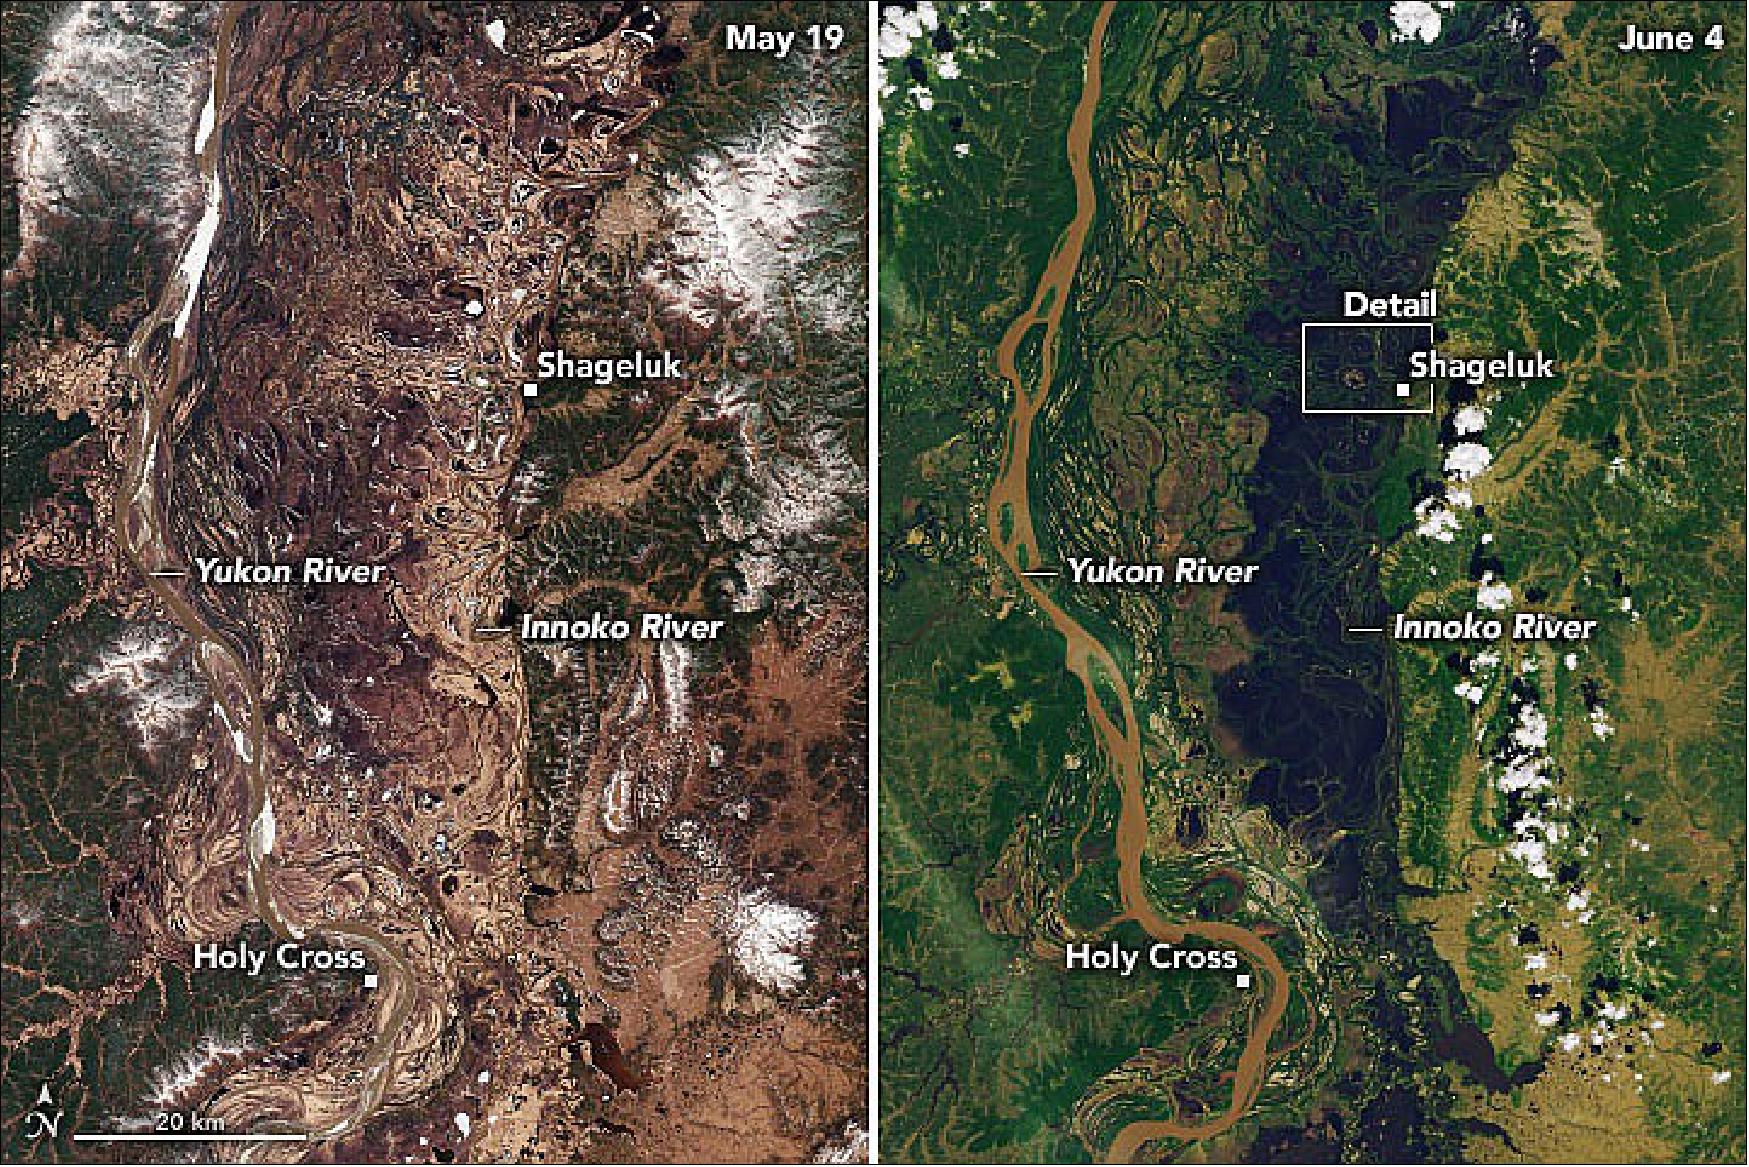 Figure 22: The transition is evident in these natural-color images, acquired by the Operational Land Imager-2 (OLI-2) on Landsat-9. The left image shows the lowlands on May 19, 2022, during a typical mid-spring day. The right image shows the same area on June 4, 2022, after meltwater had inundated the landscape (image credit: NASA Earth Observatory images by Joshua Stevens, using Landsat data from the U.S. Geological Survey. Story by Kathryn Hansen with input from the Adolph Hamilton family stories and experiences)